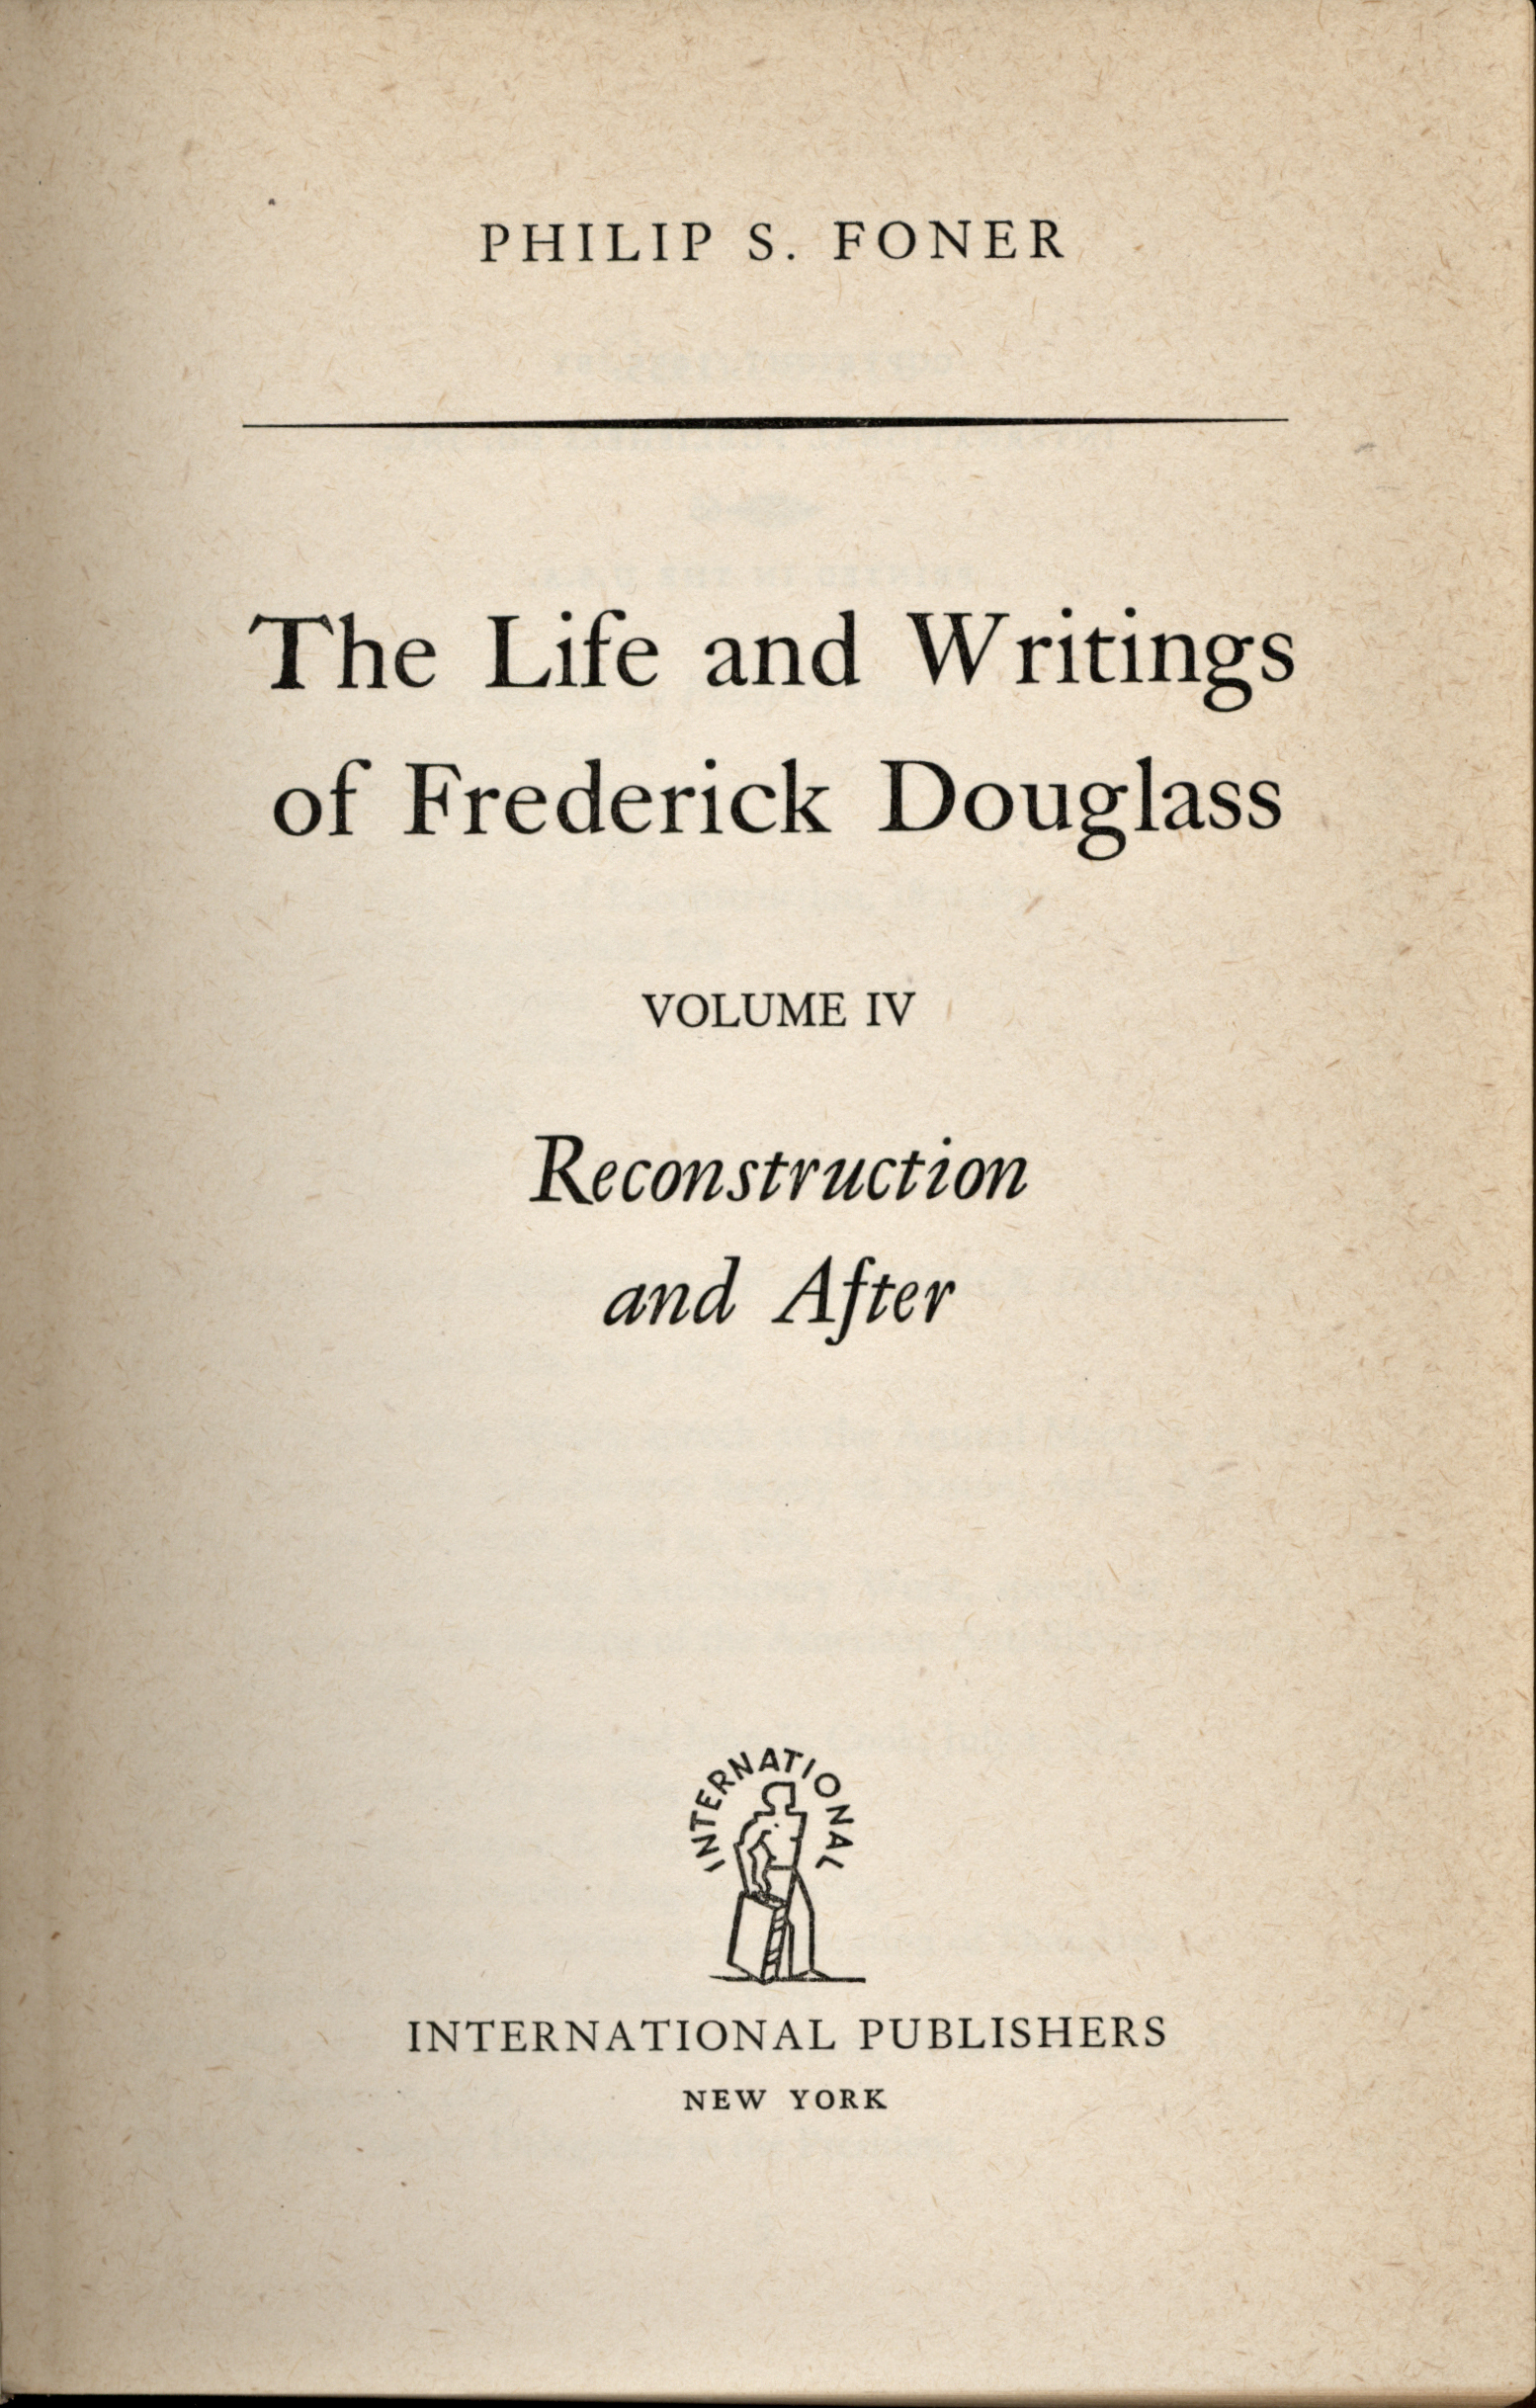 title page of The Life and Writings of Frederick Douglass